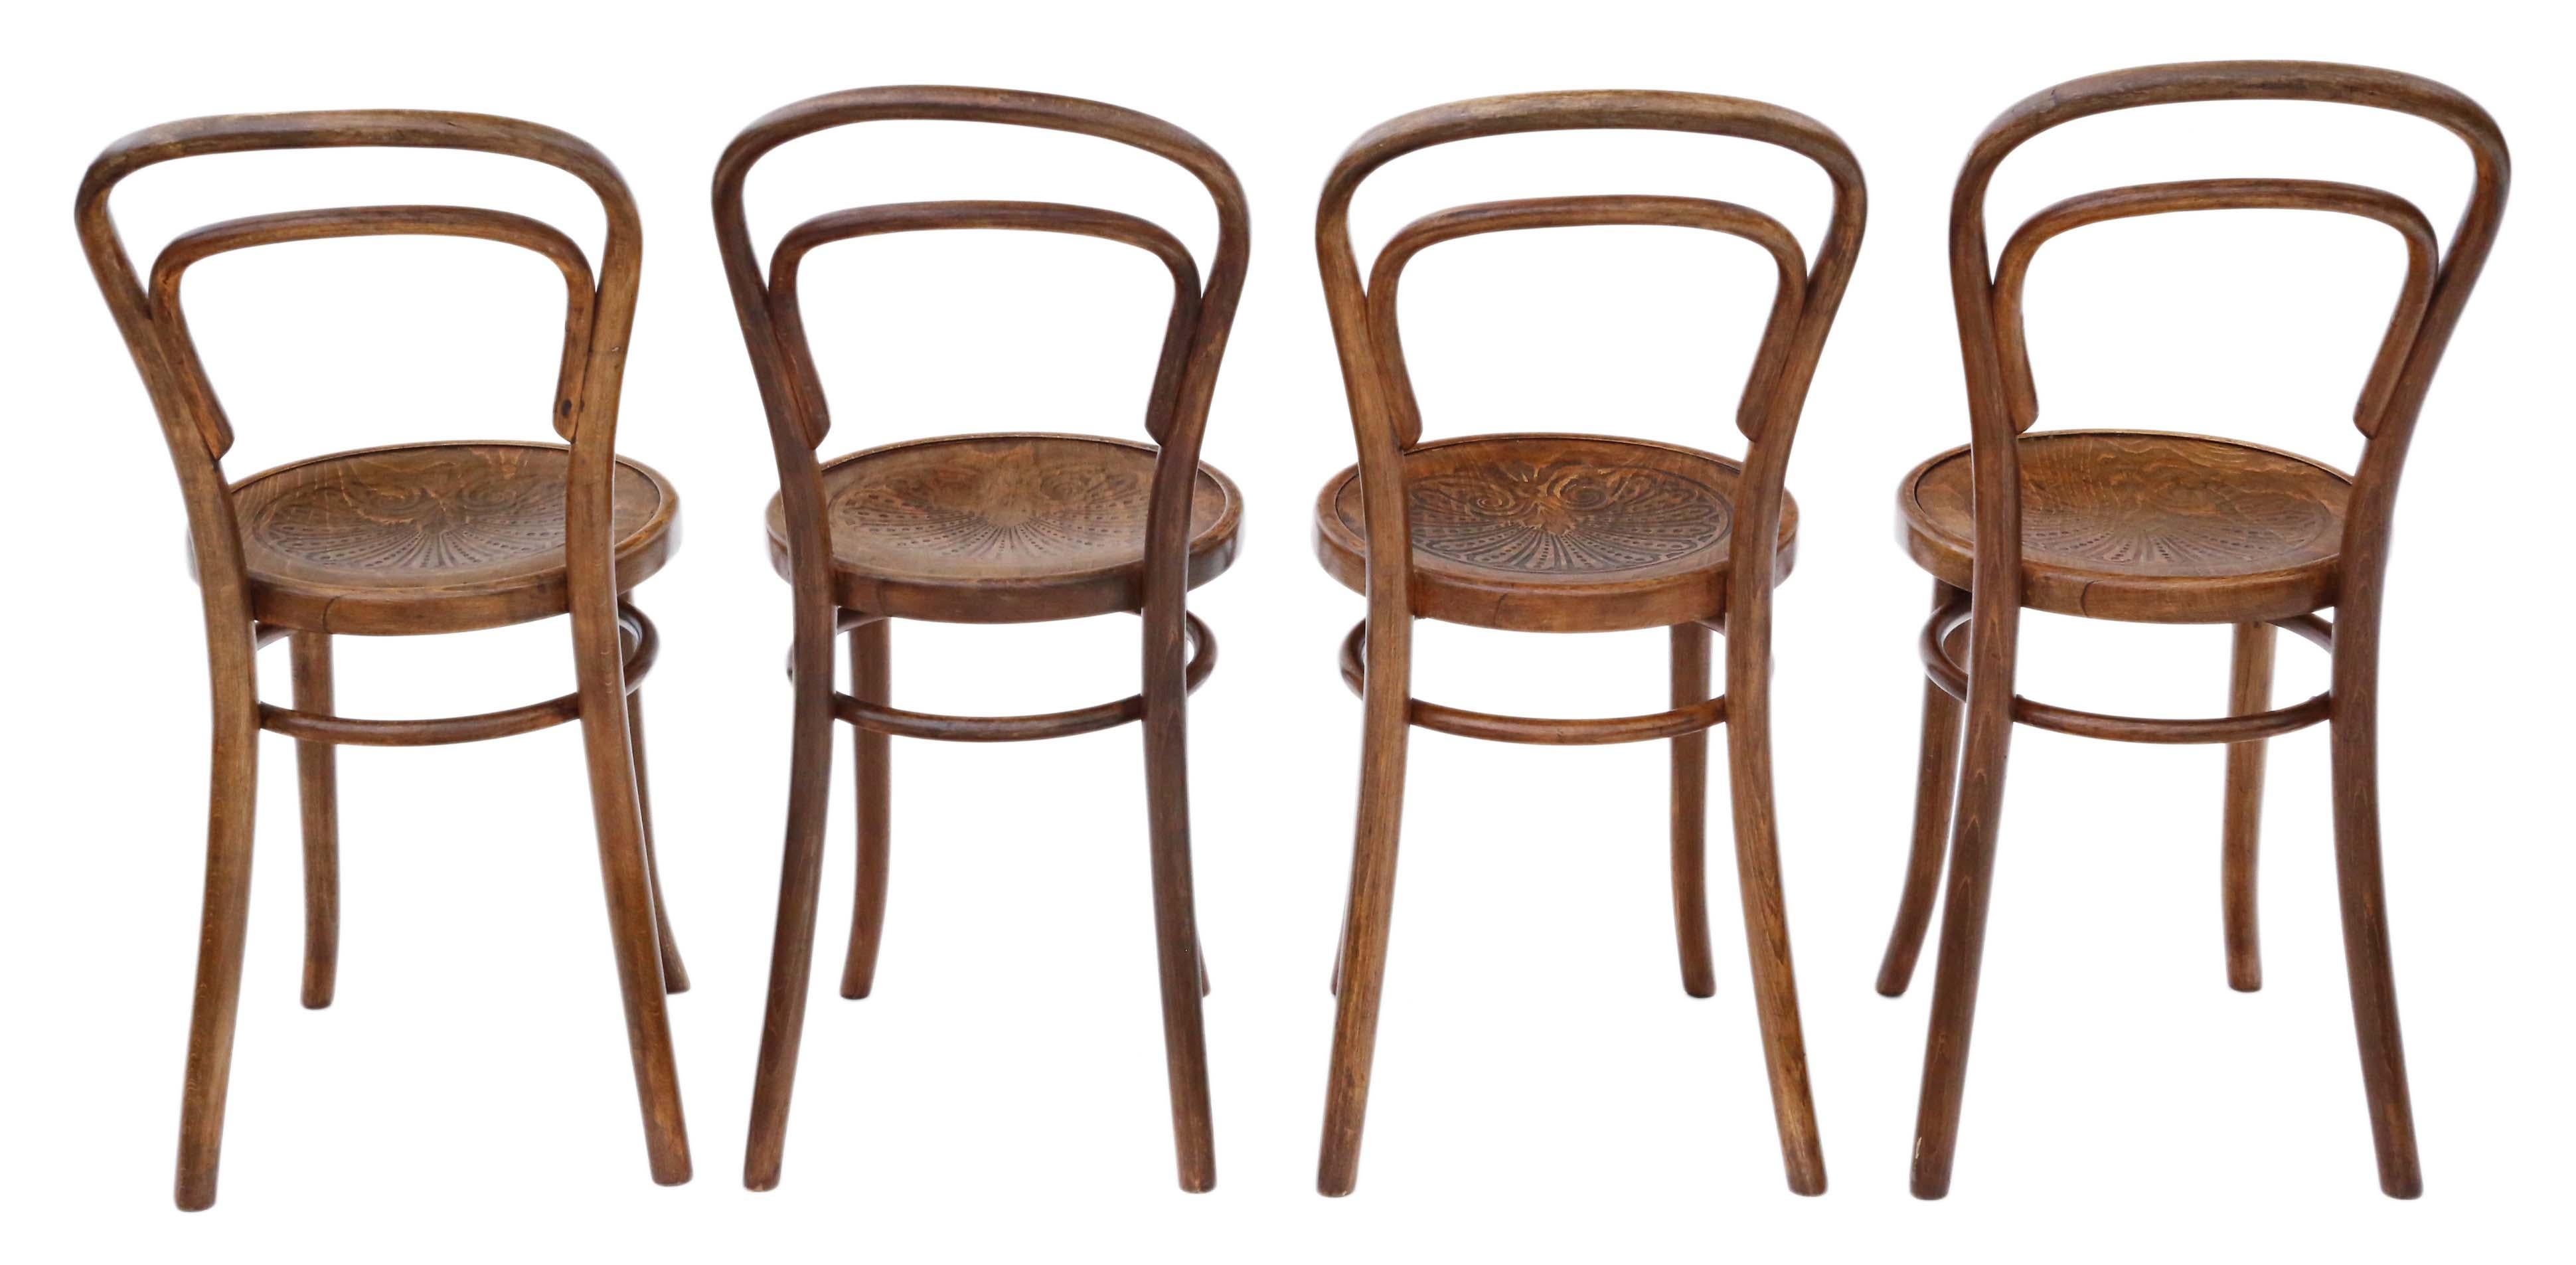 Antique quality set of 4 bentwood kitchen dining chairs, early 20th century.

Solid, no loose joints and no woodworm. Full of age, character and charm.

Would look great in the right location!

Overall maximum dimensions: 39cm W x 50cm D x